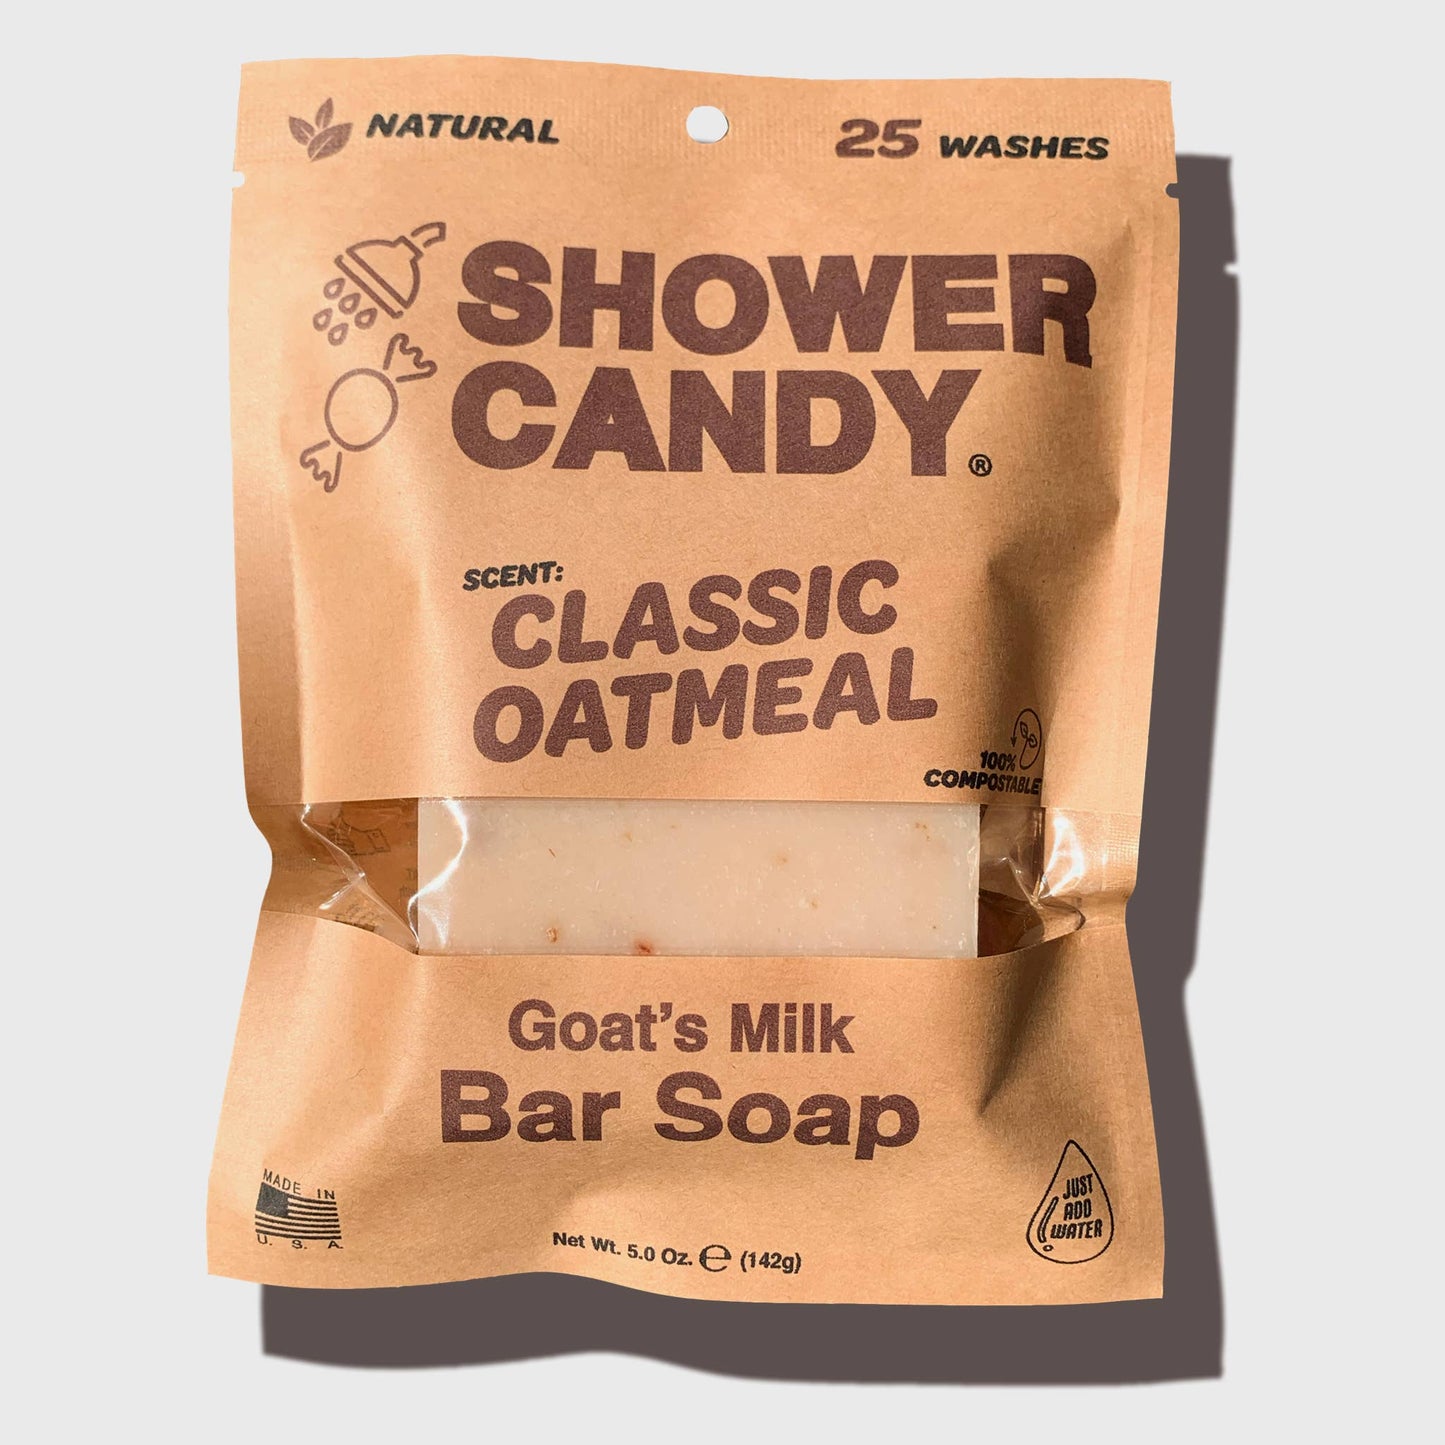 Shower Candy - Classic Oatmeal Body Wash Bar Soap with Goat's Milk